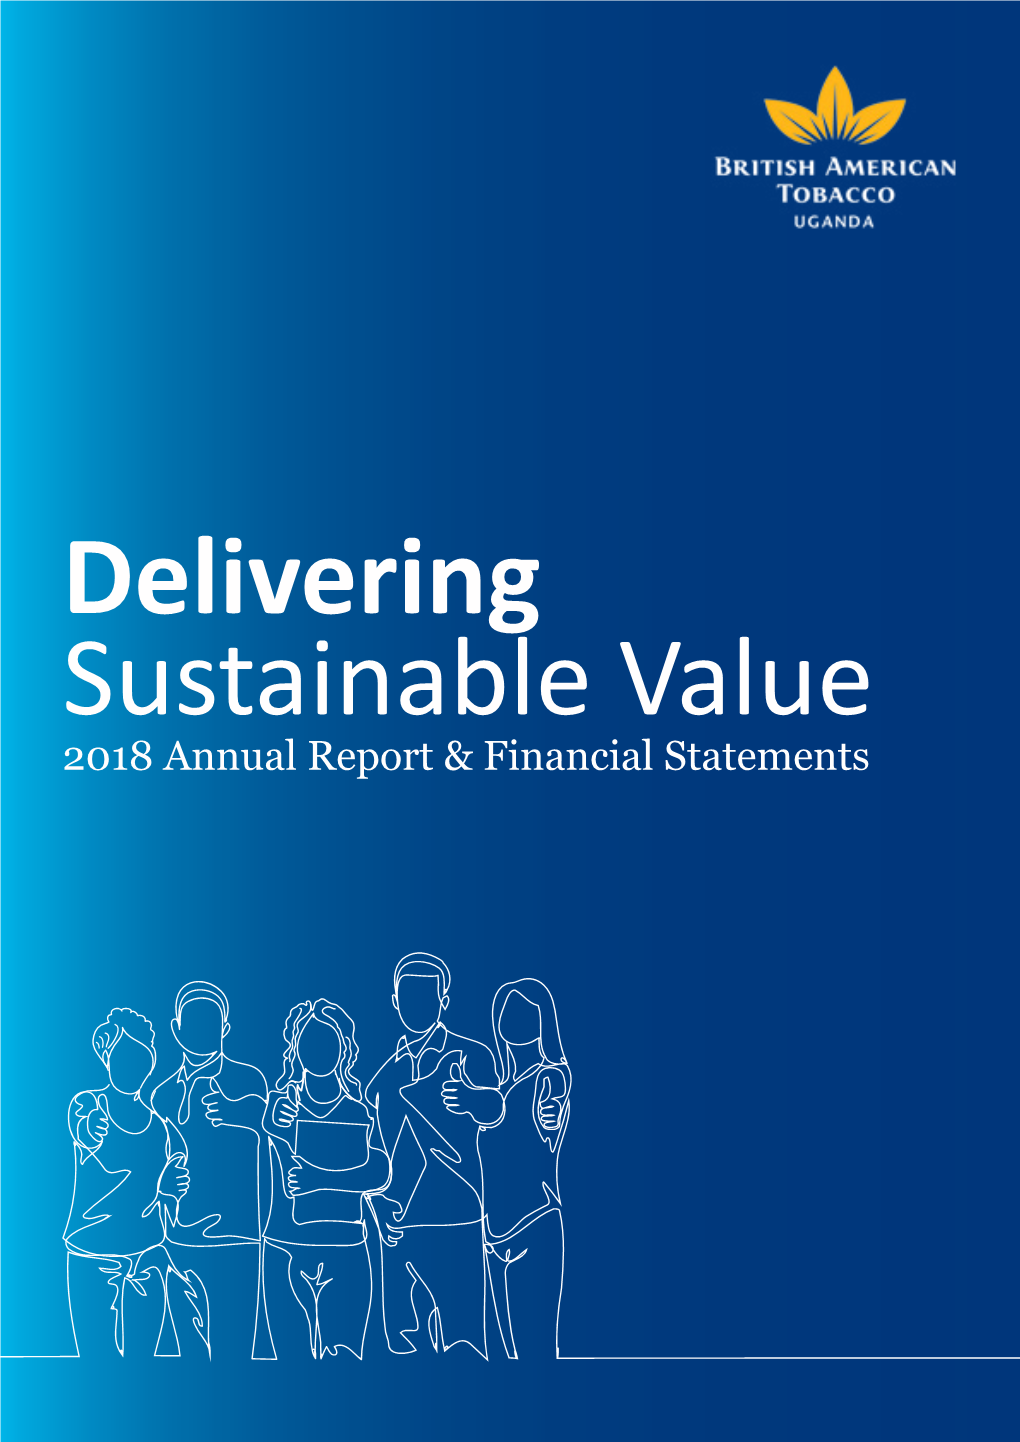 Delivering Sustainable Value 2018 Annual Report & Financial Statements